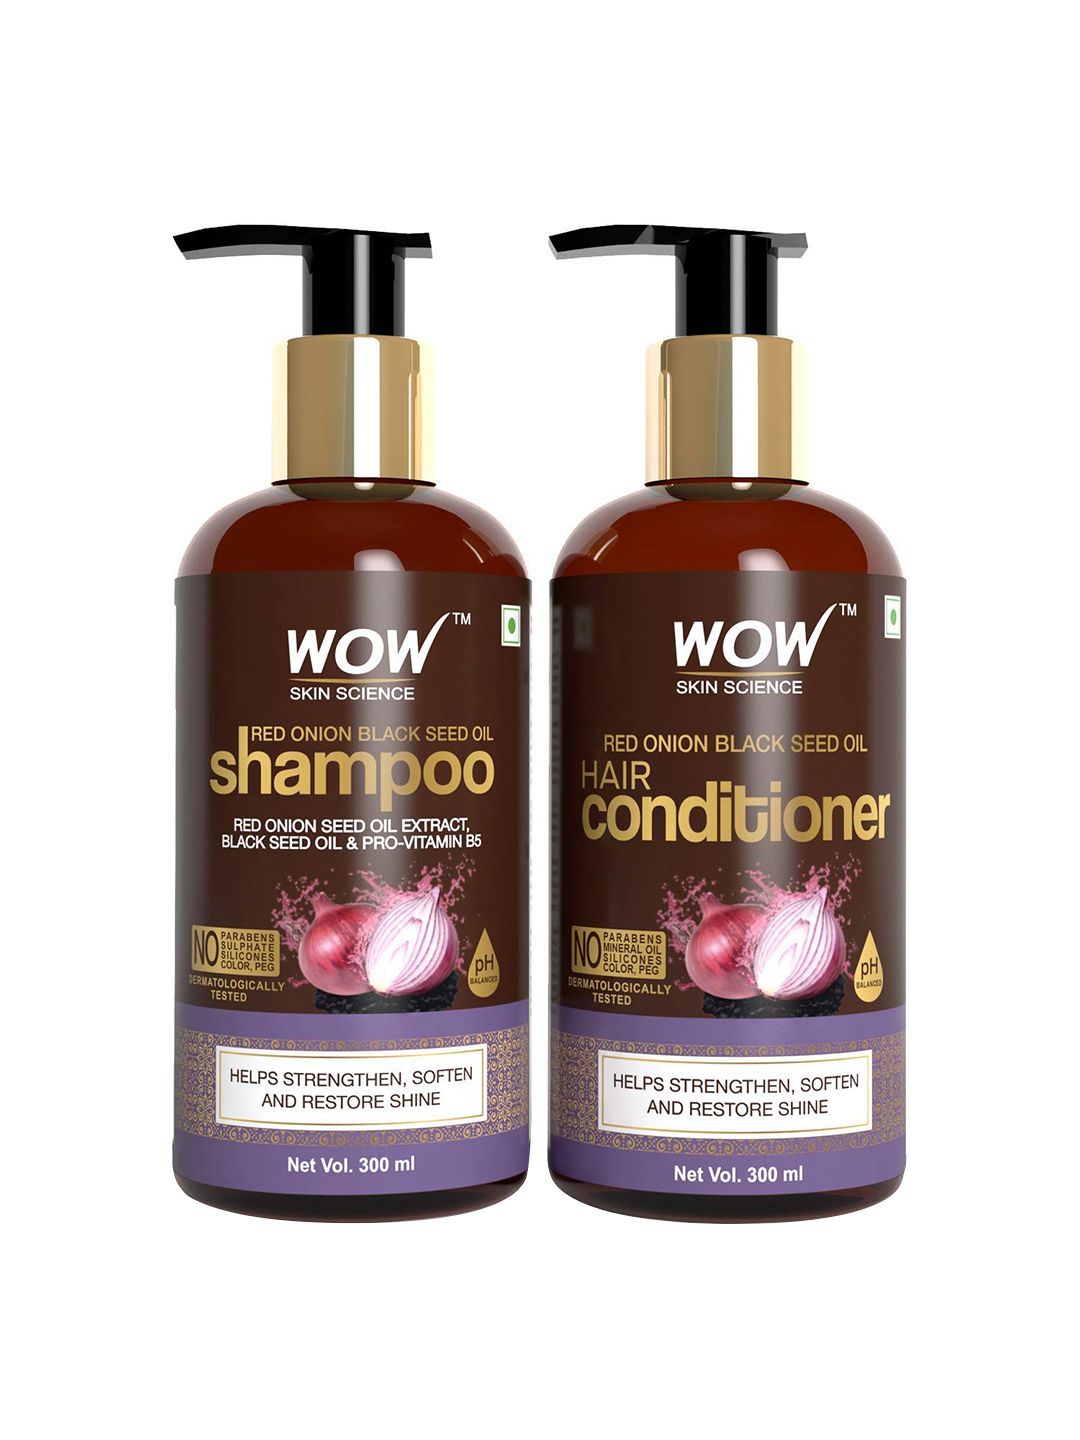 WOW SKIN SCIENCE Red Onion Black Seed Oil Shampoo & Conditioner Kit - 300 ml each Price in India